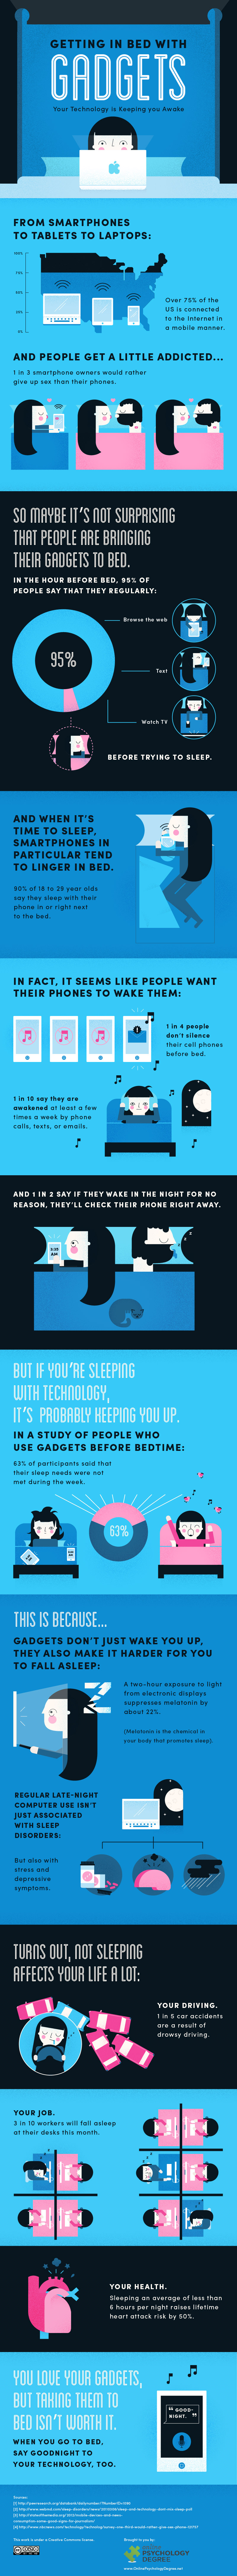 Badgets in Bed Infographic